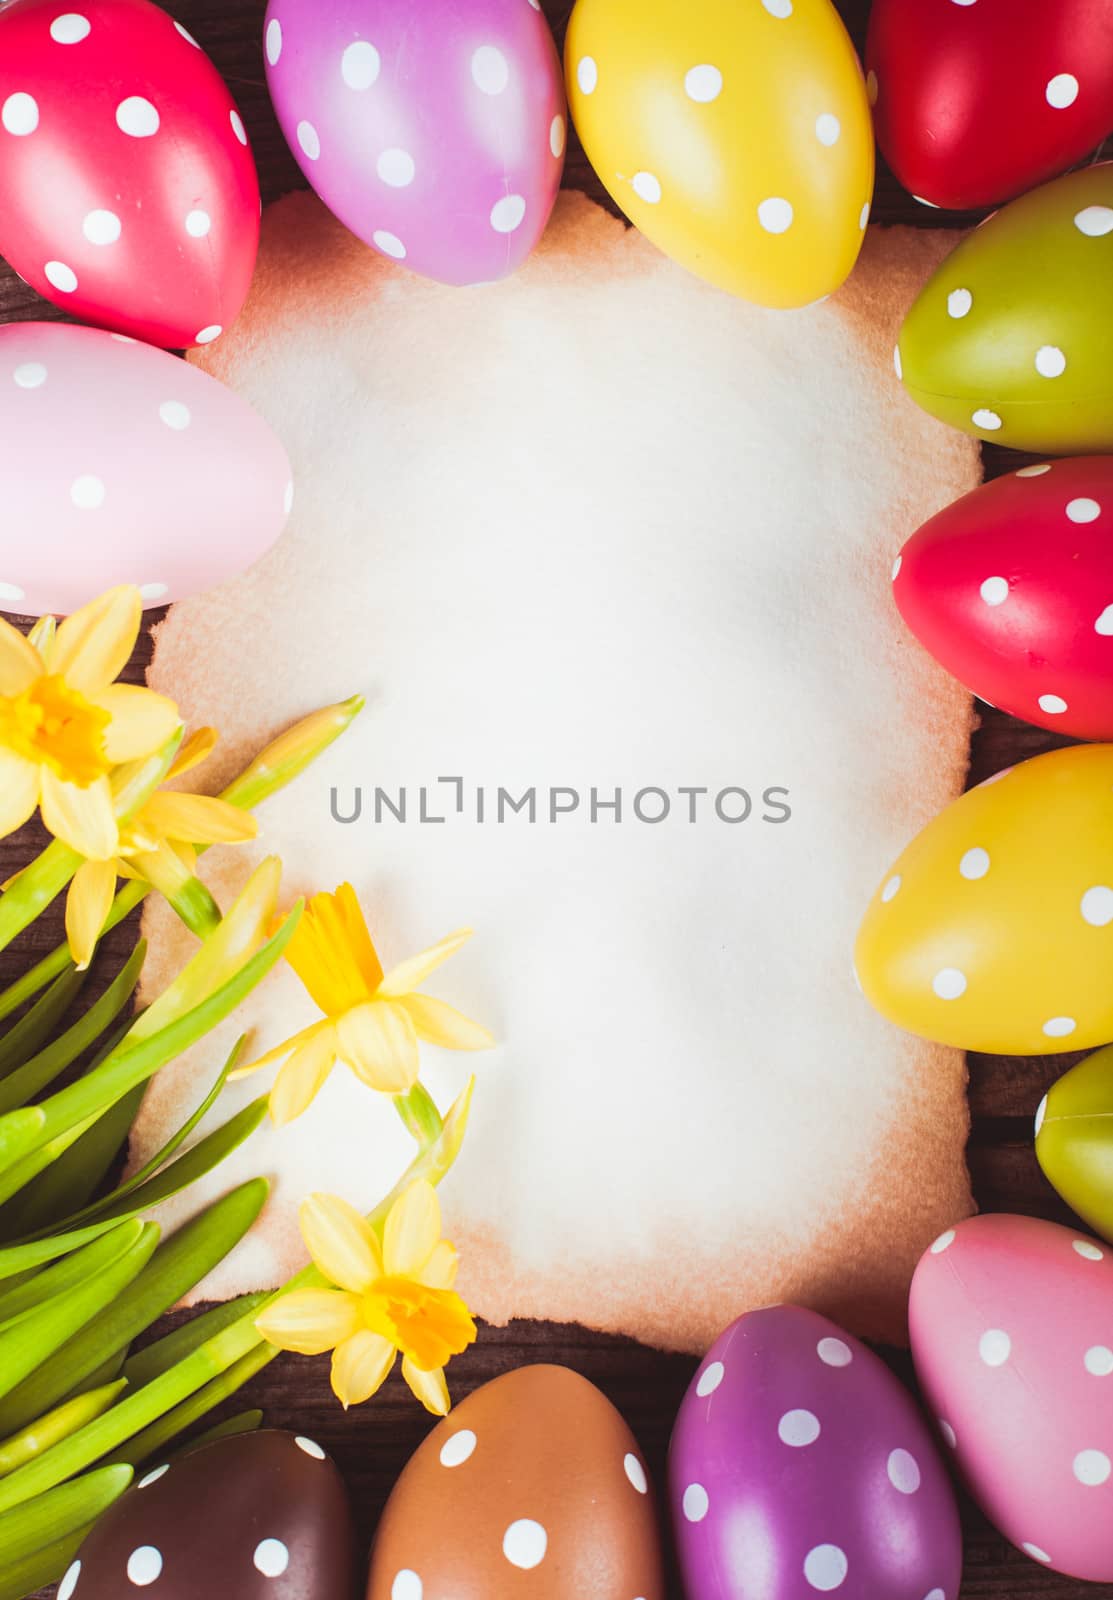 Colorful polka dot eggs and empty greeting card. Easter decorations